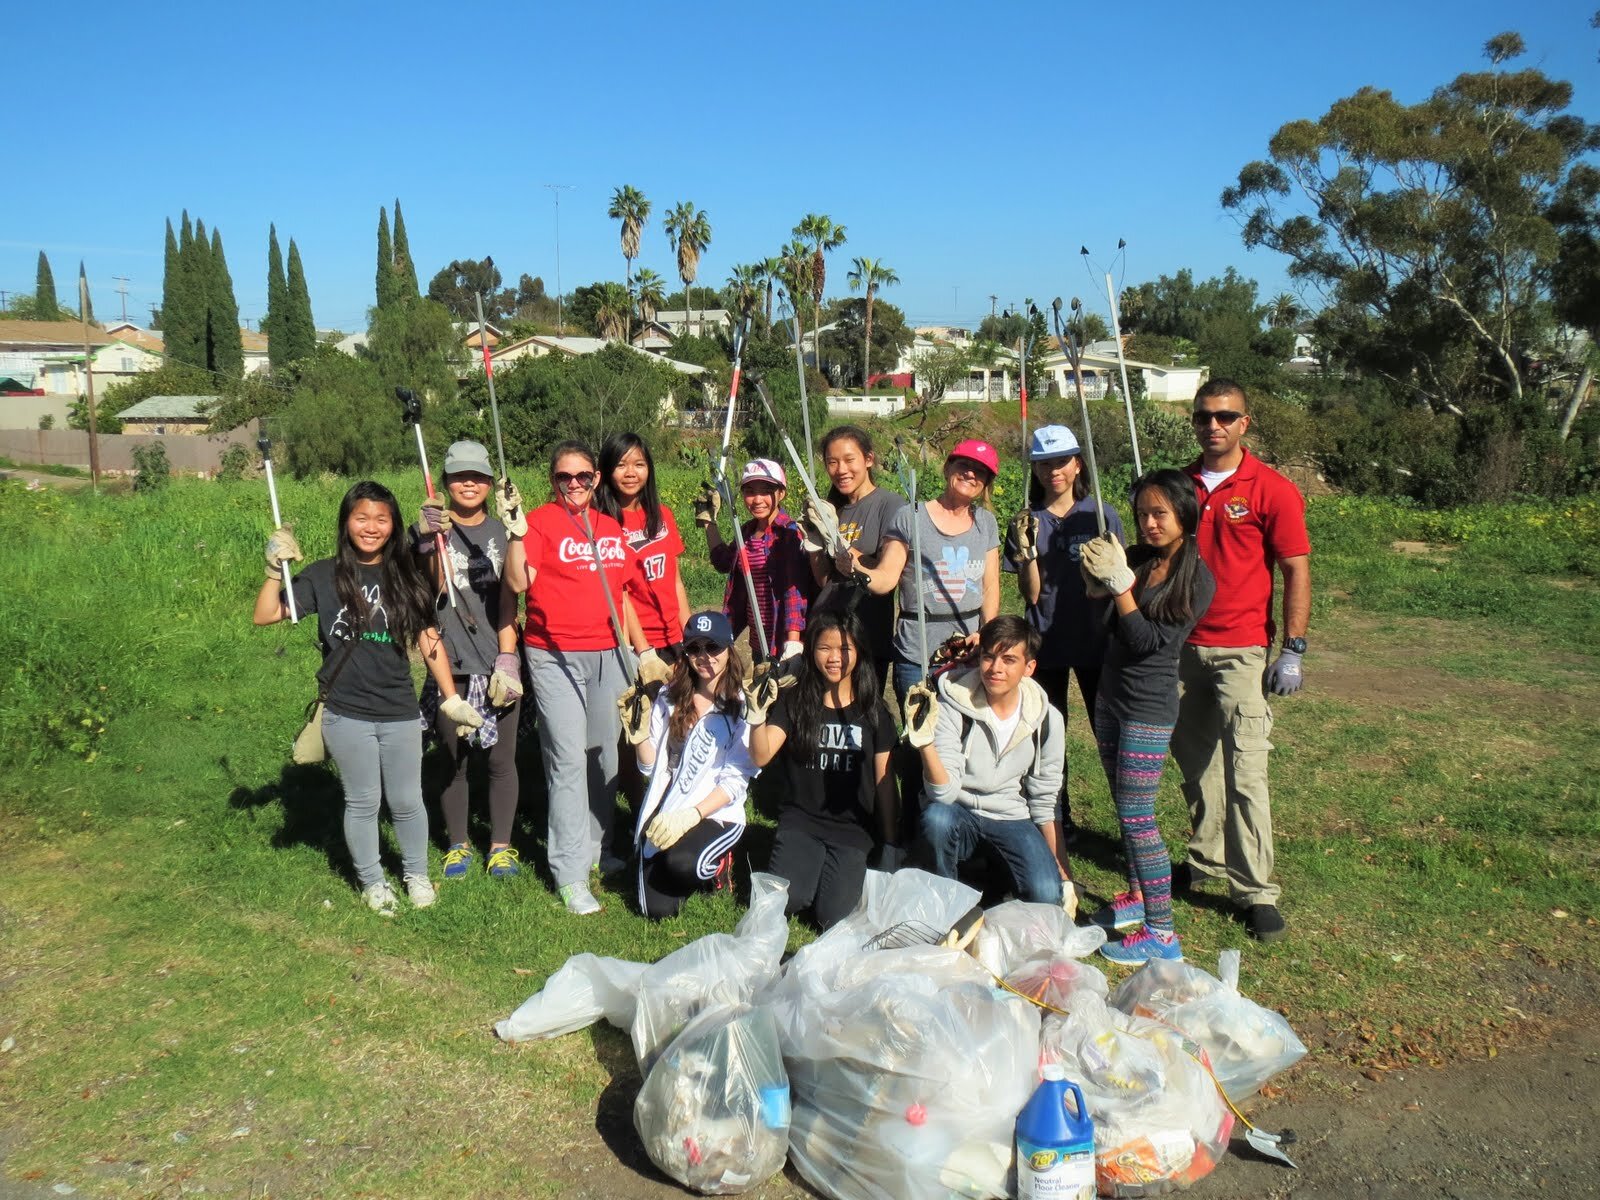 A02 Group Shot With Tools and Bags 02-20-2016 KIDS TRASH.jpg